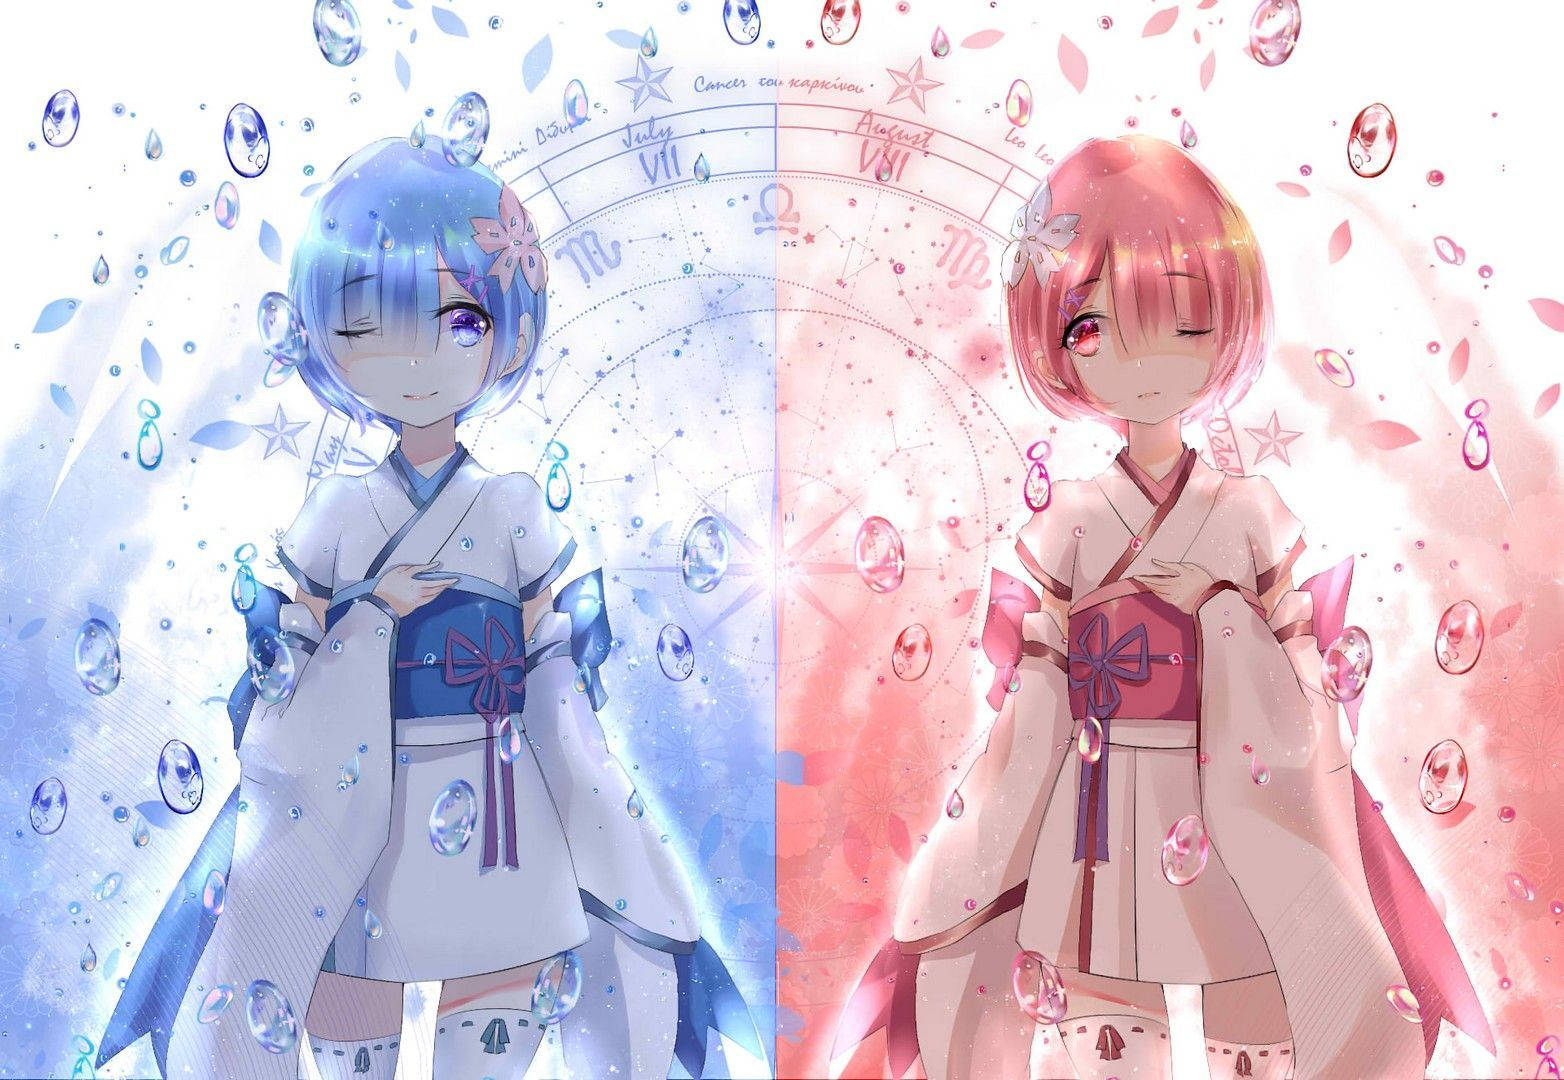 "Rem and Ram - Together in Re Zero" Wallpaper